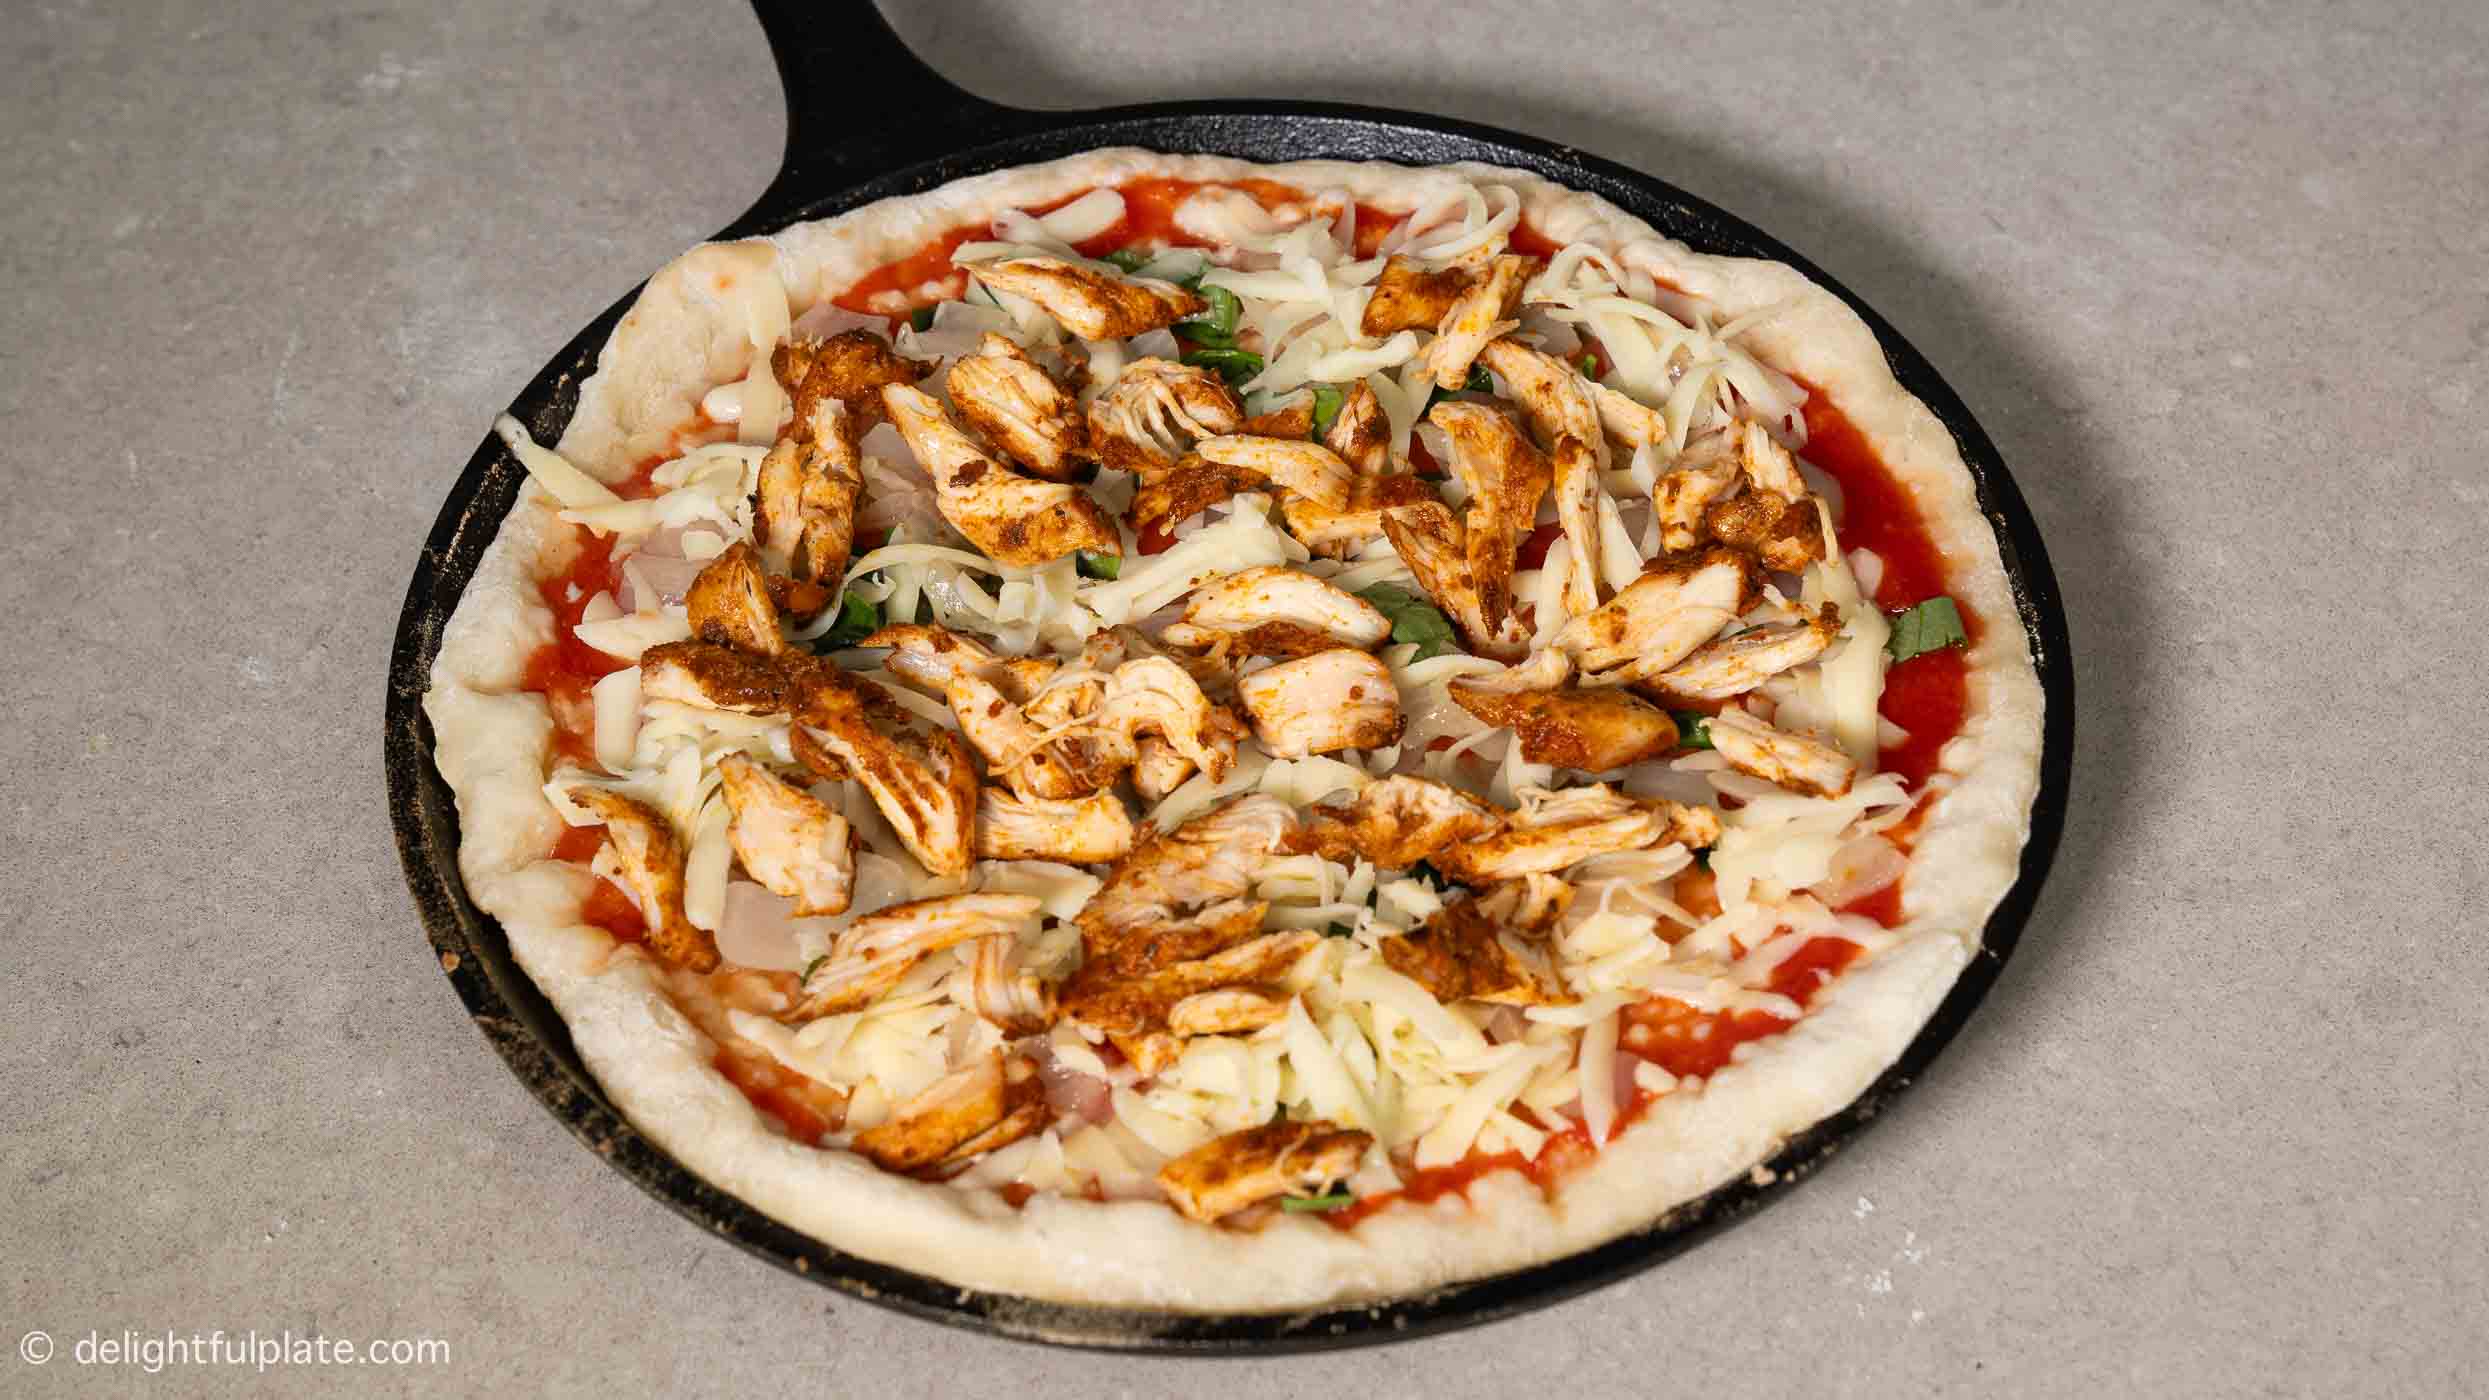 adding shredded chicken on the pizza.